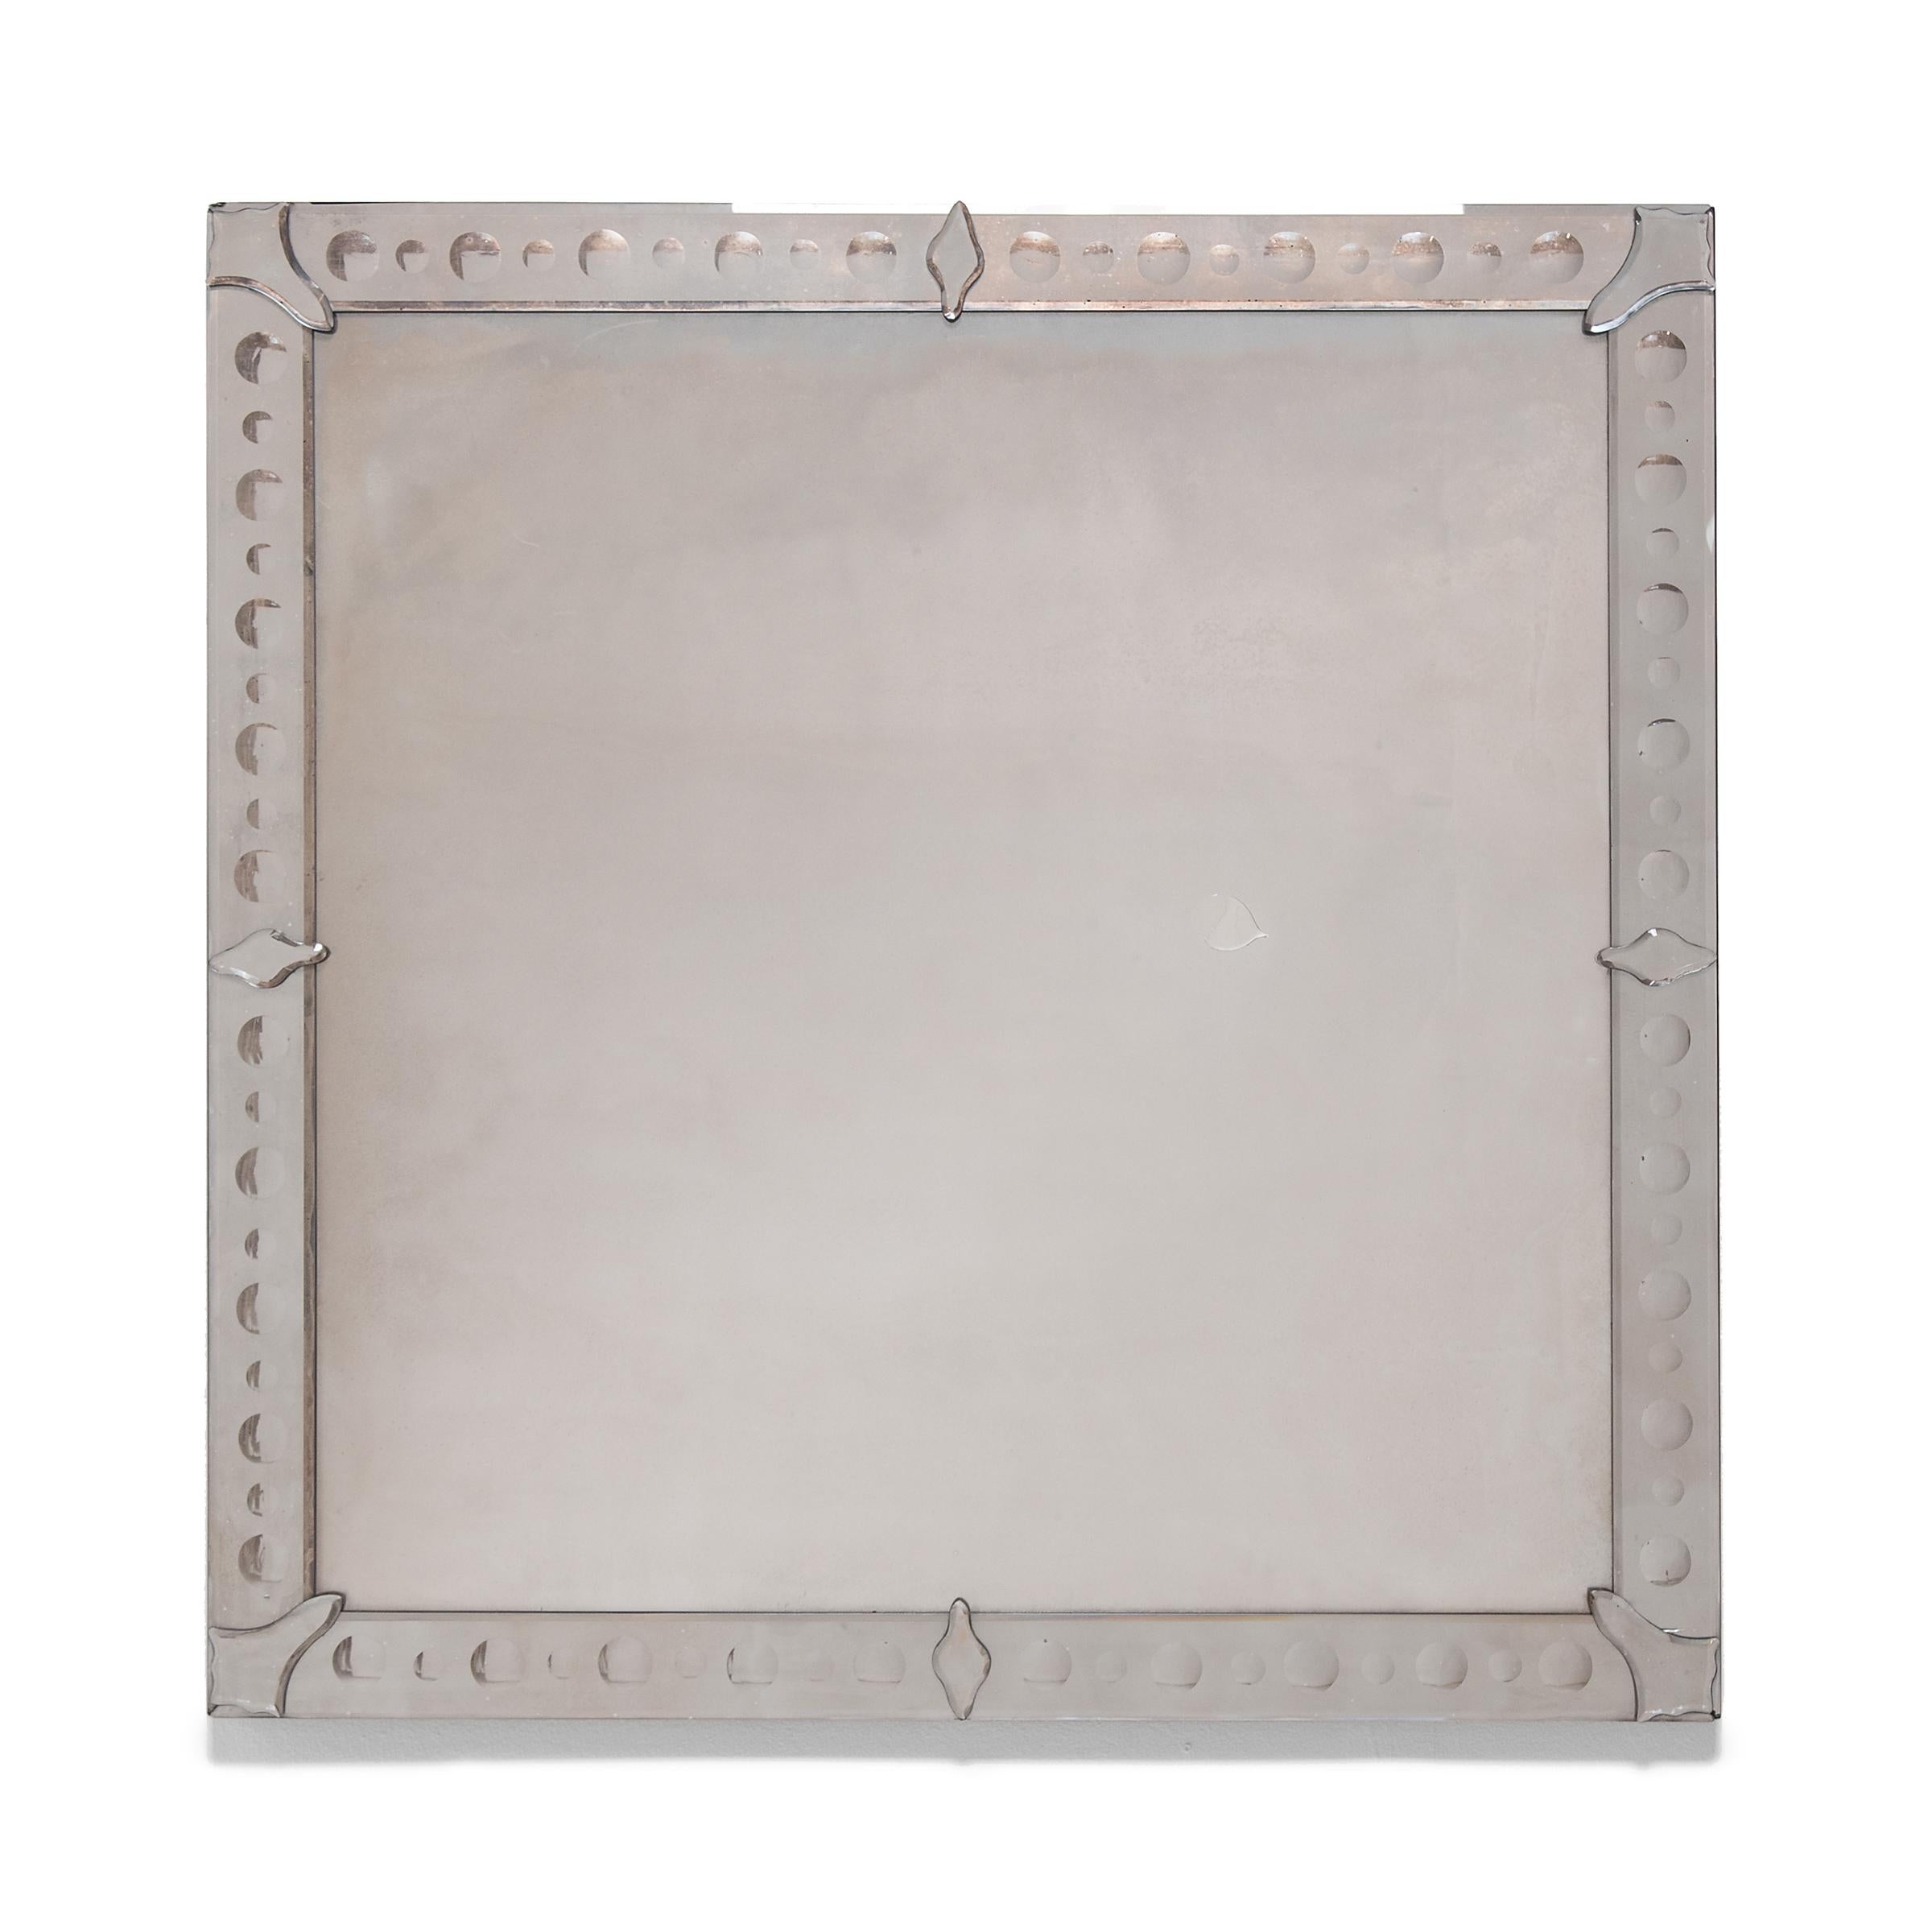 20th Century Pair of Square Wall Mirrors with Spoiled Glass